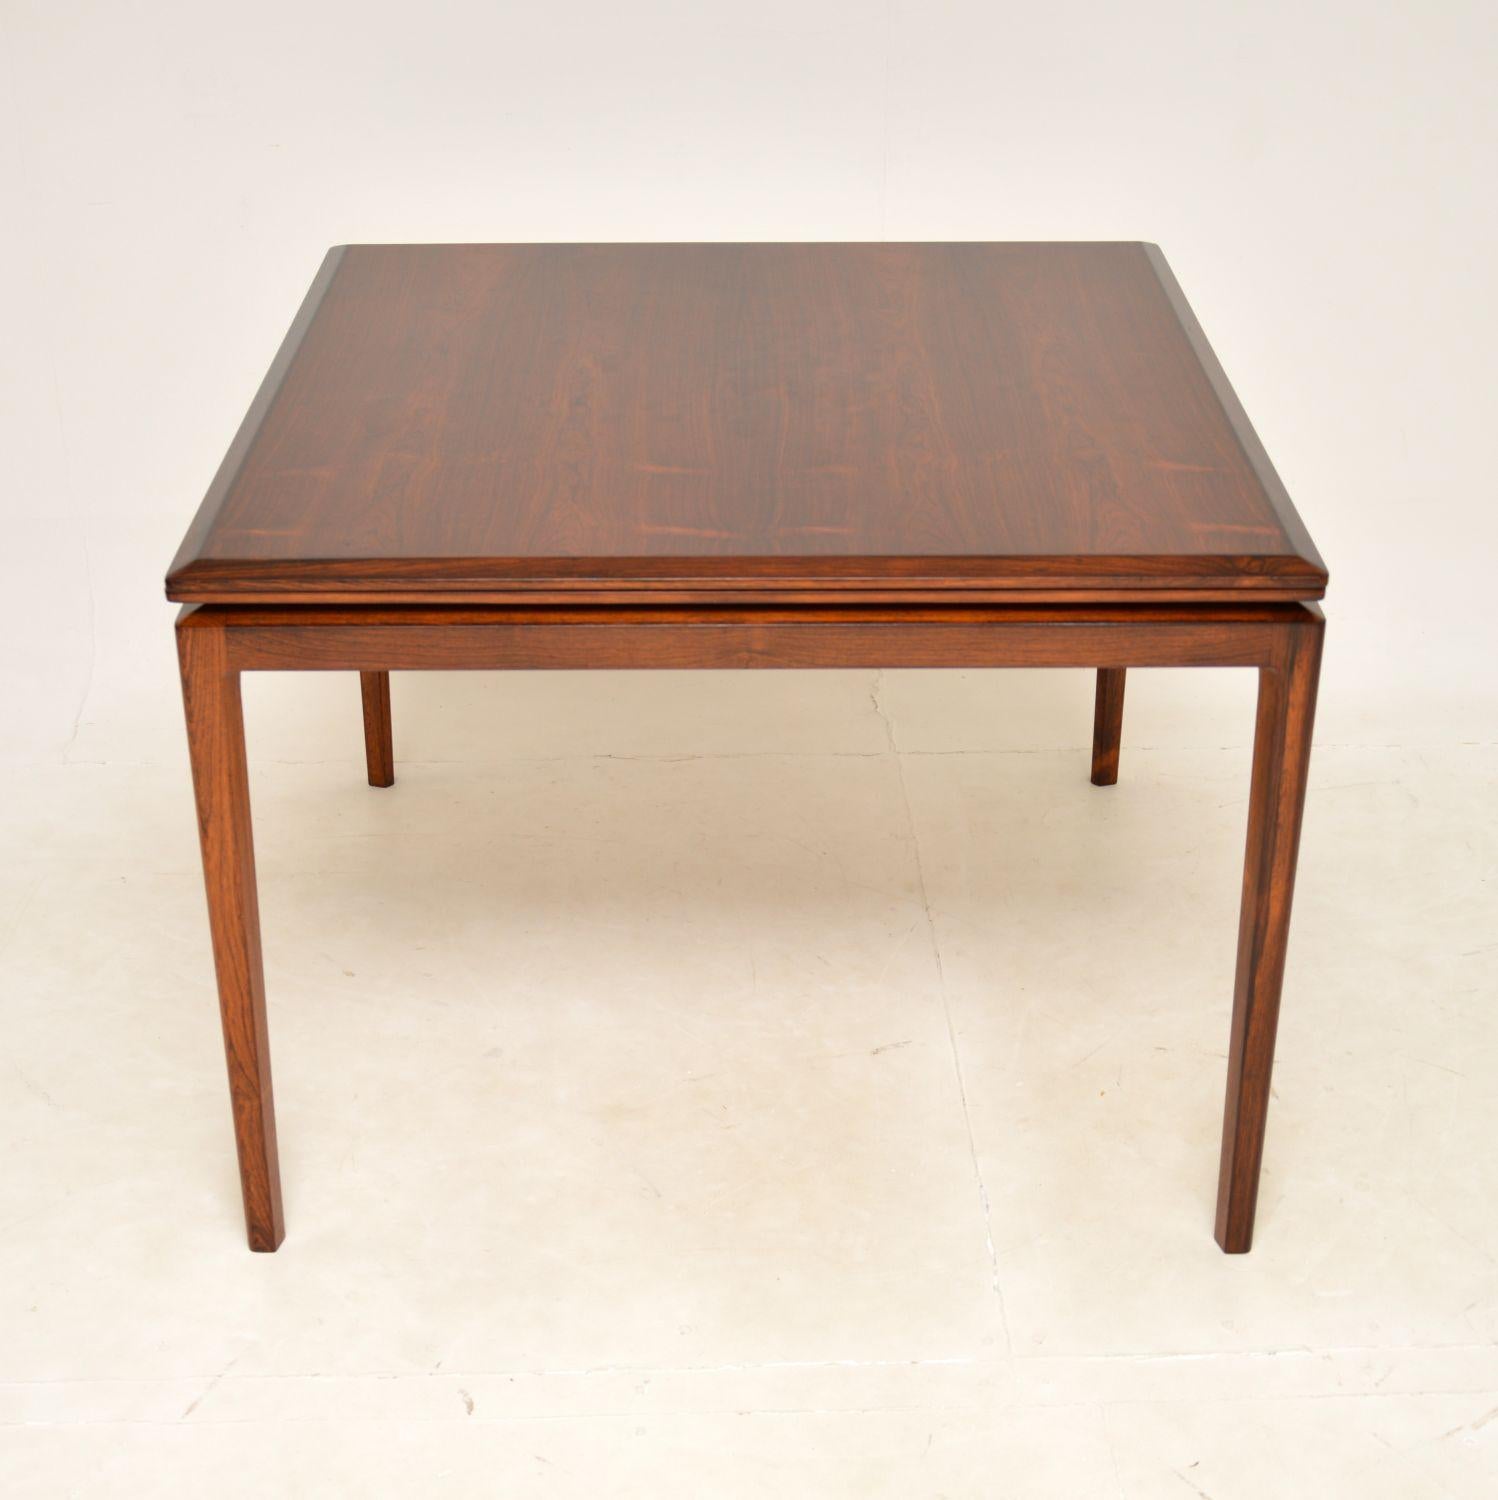 A stylish and exceptionally rare vintage Danish dining table. This was designed by Ib Kofod Larsen for Christensen and Larsen, it dates from the 1960s.

The quality is outstanding, this has a very sturdy yet also extremely elegant design. The